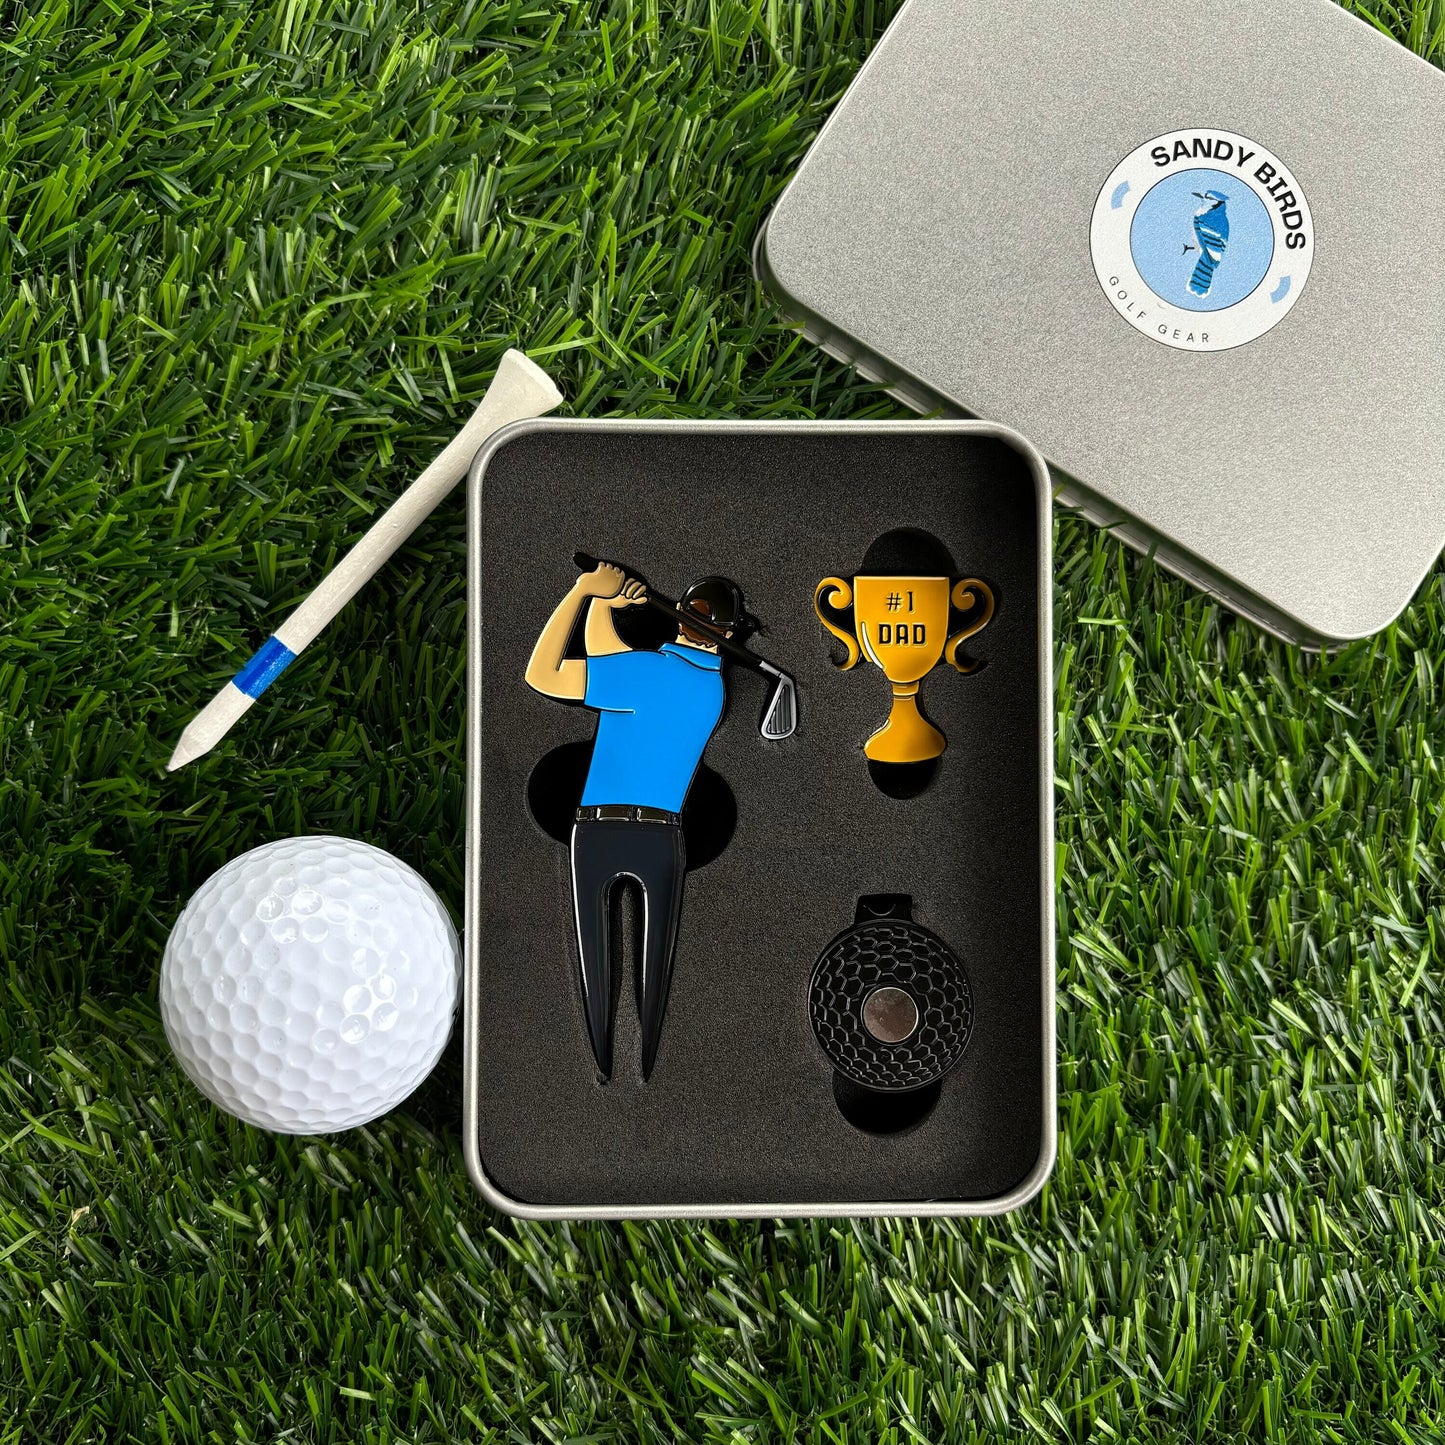 Fathers Day #1 Dad Golf Divot Tool/Ball Marker Pack (Blue Shirt) | Gift for Dad | Gift for Golf Lovers